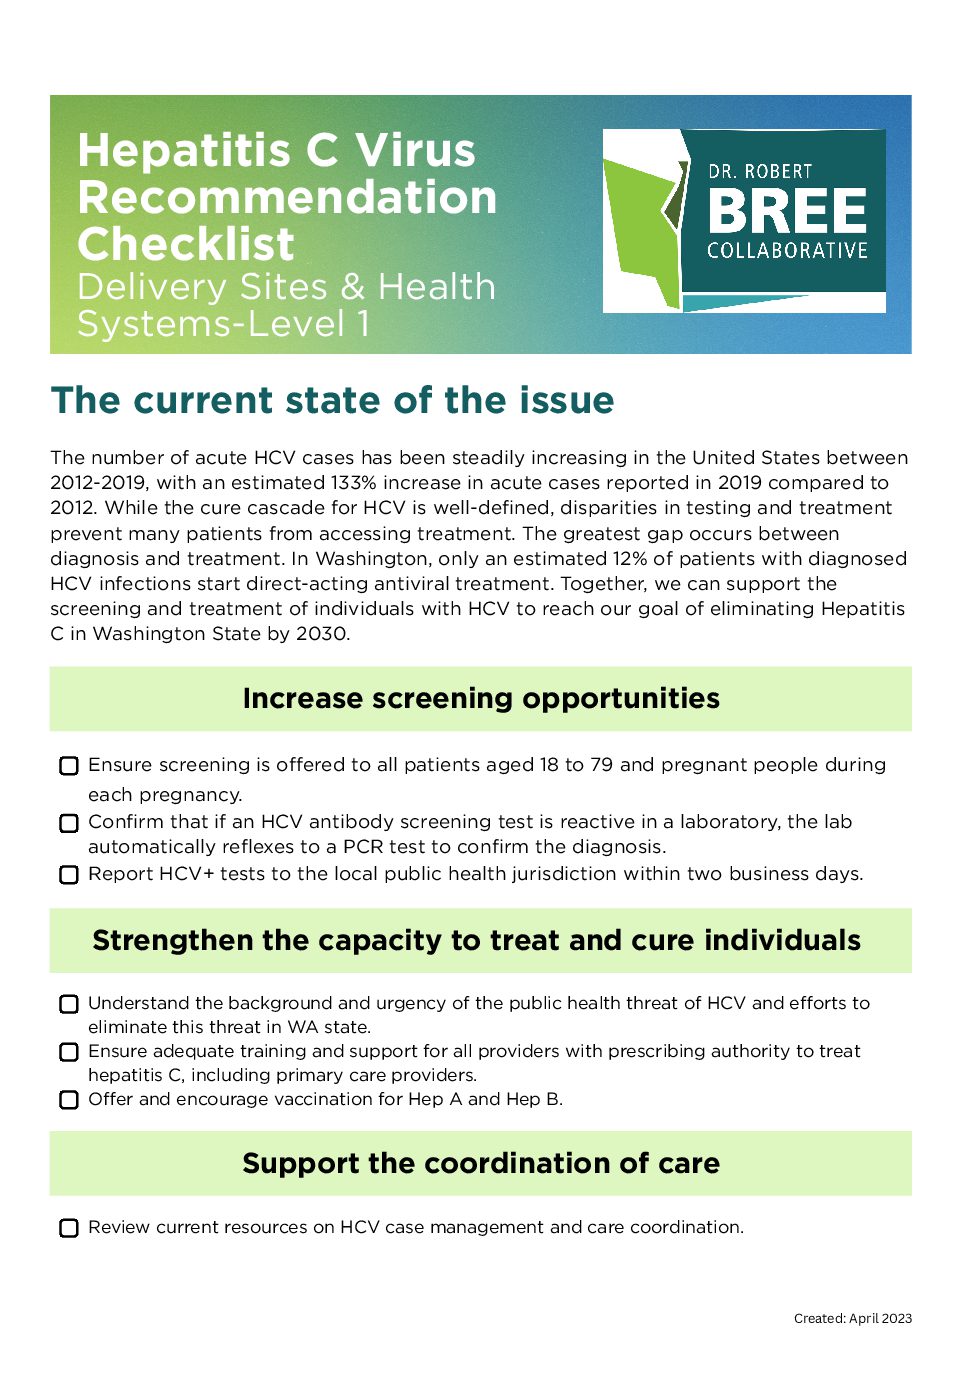 HCV Checklist Health Delivery Systems -Level 1